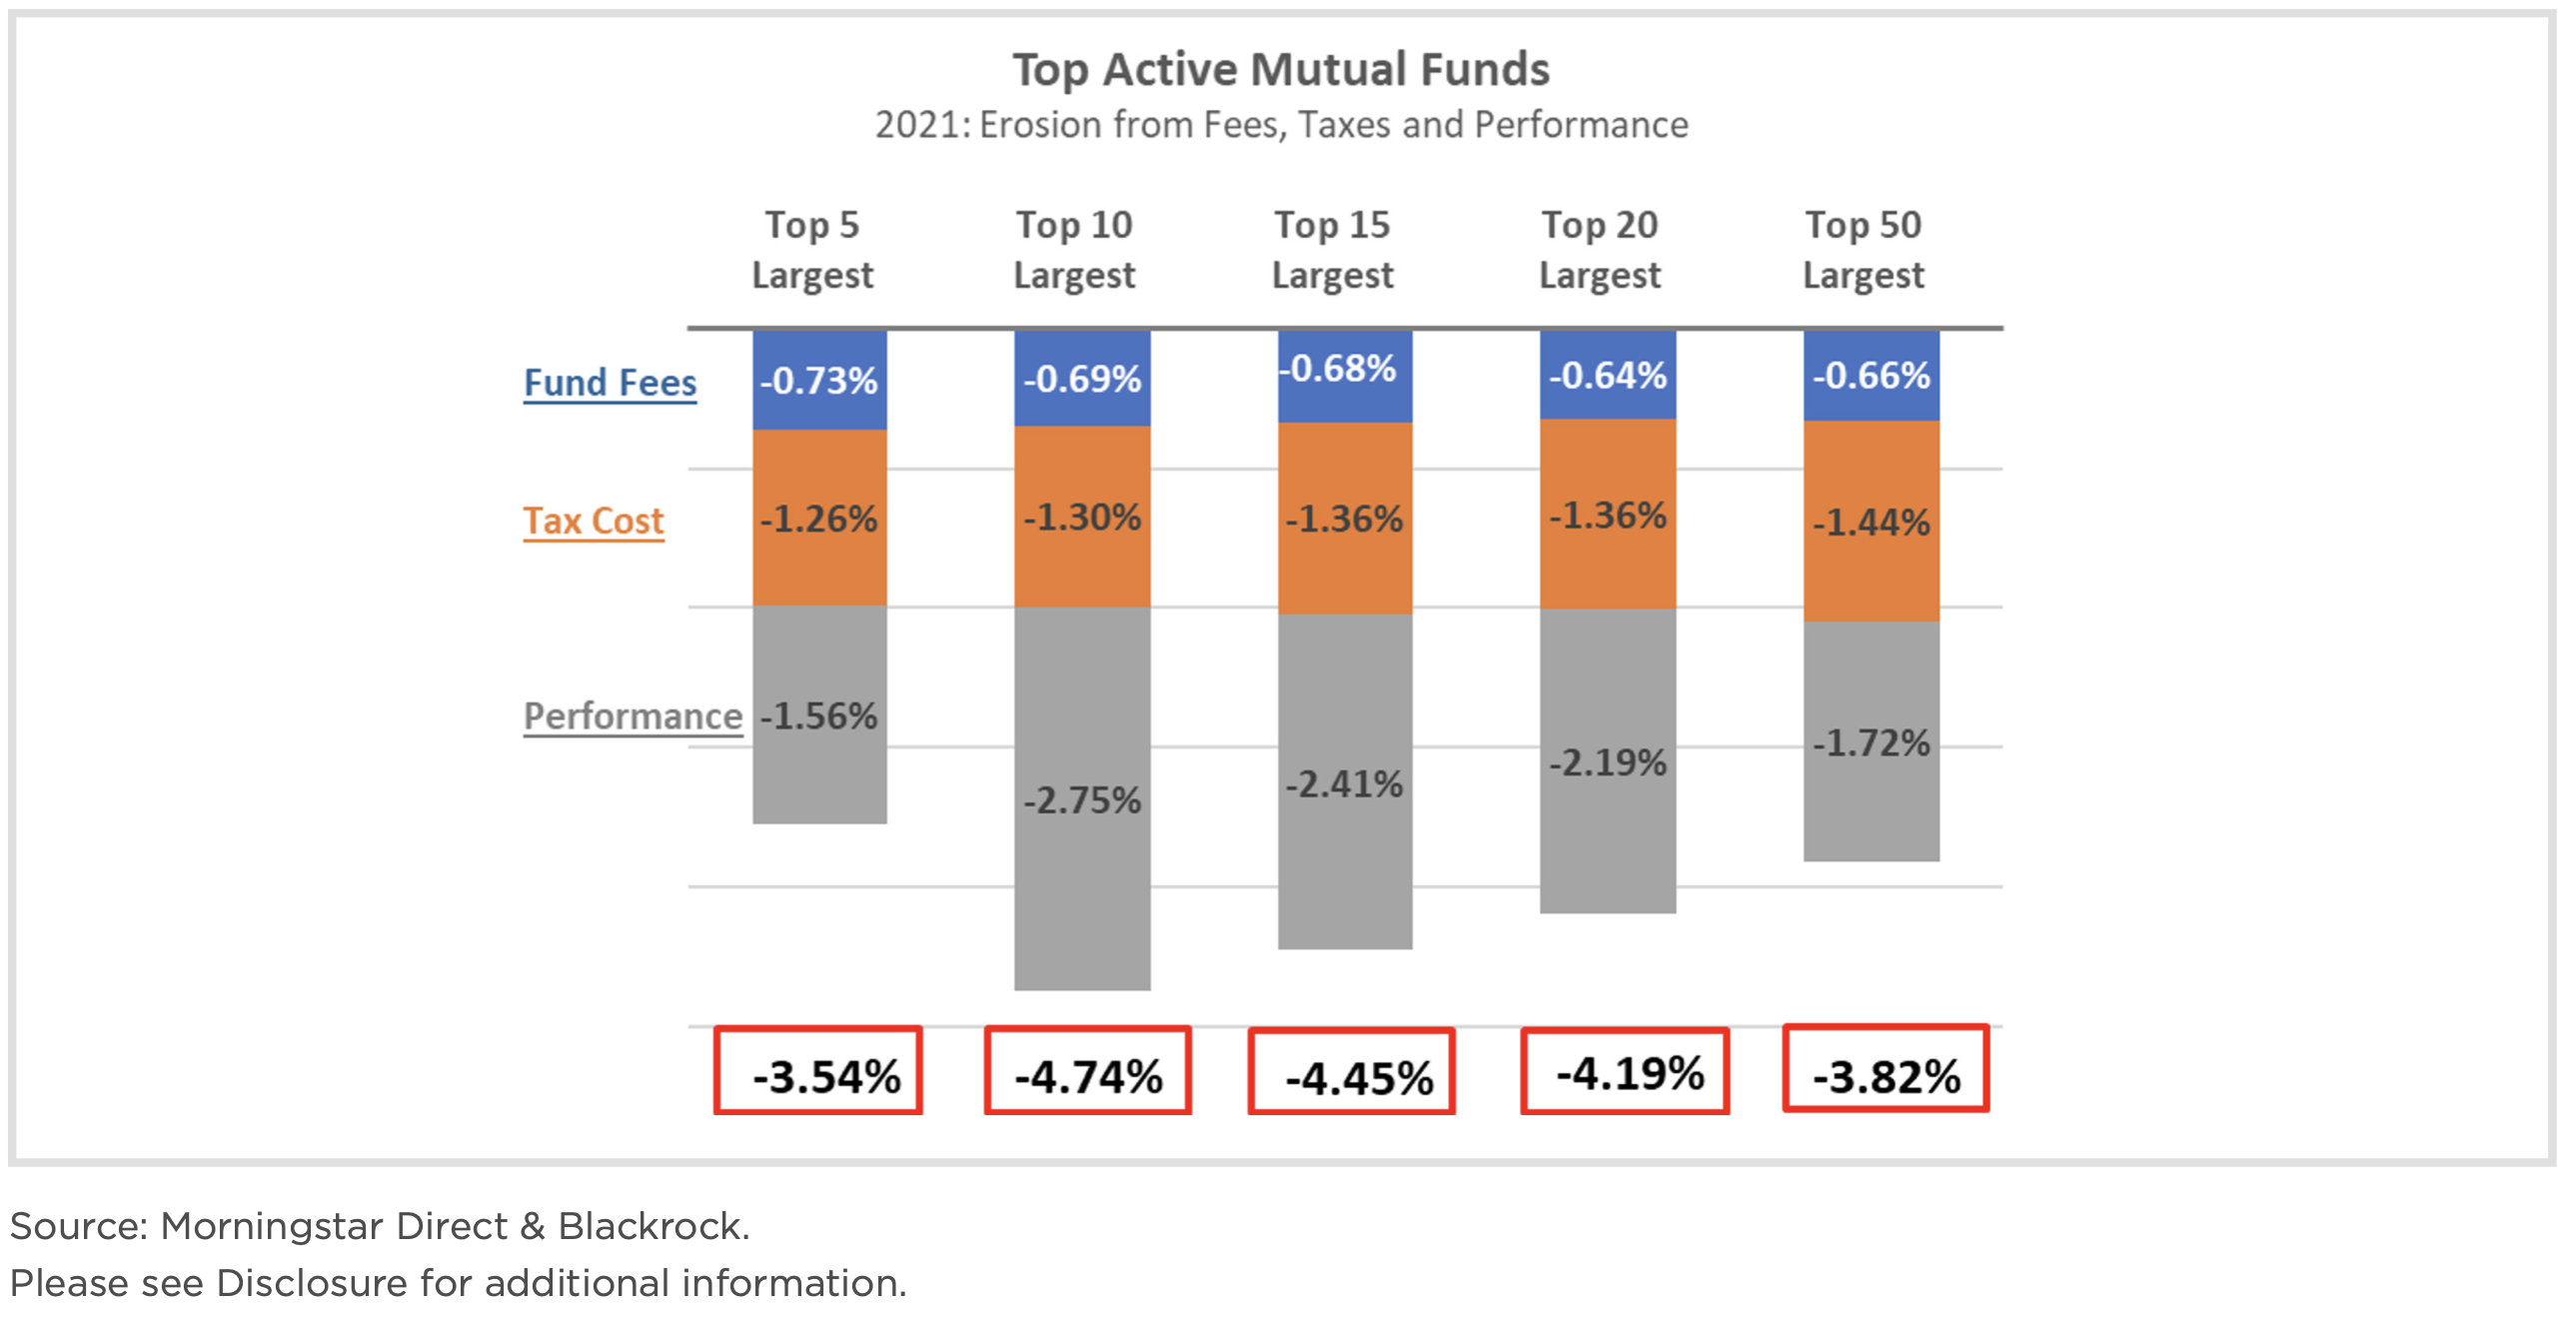 Top Active Mutual Funds